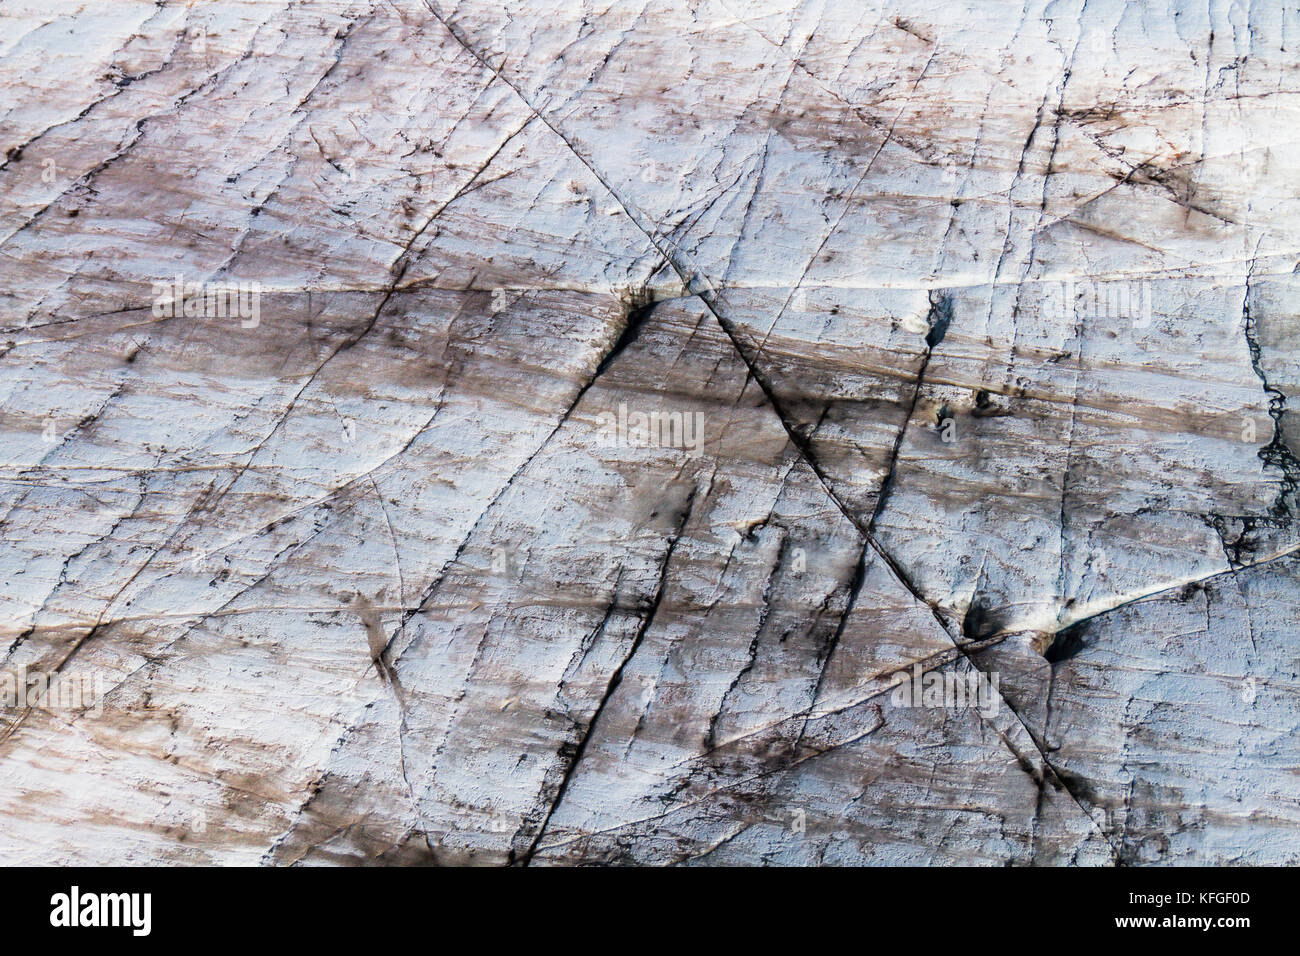 Ice patterns in the Glacier of Iceland Stock Photo